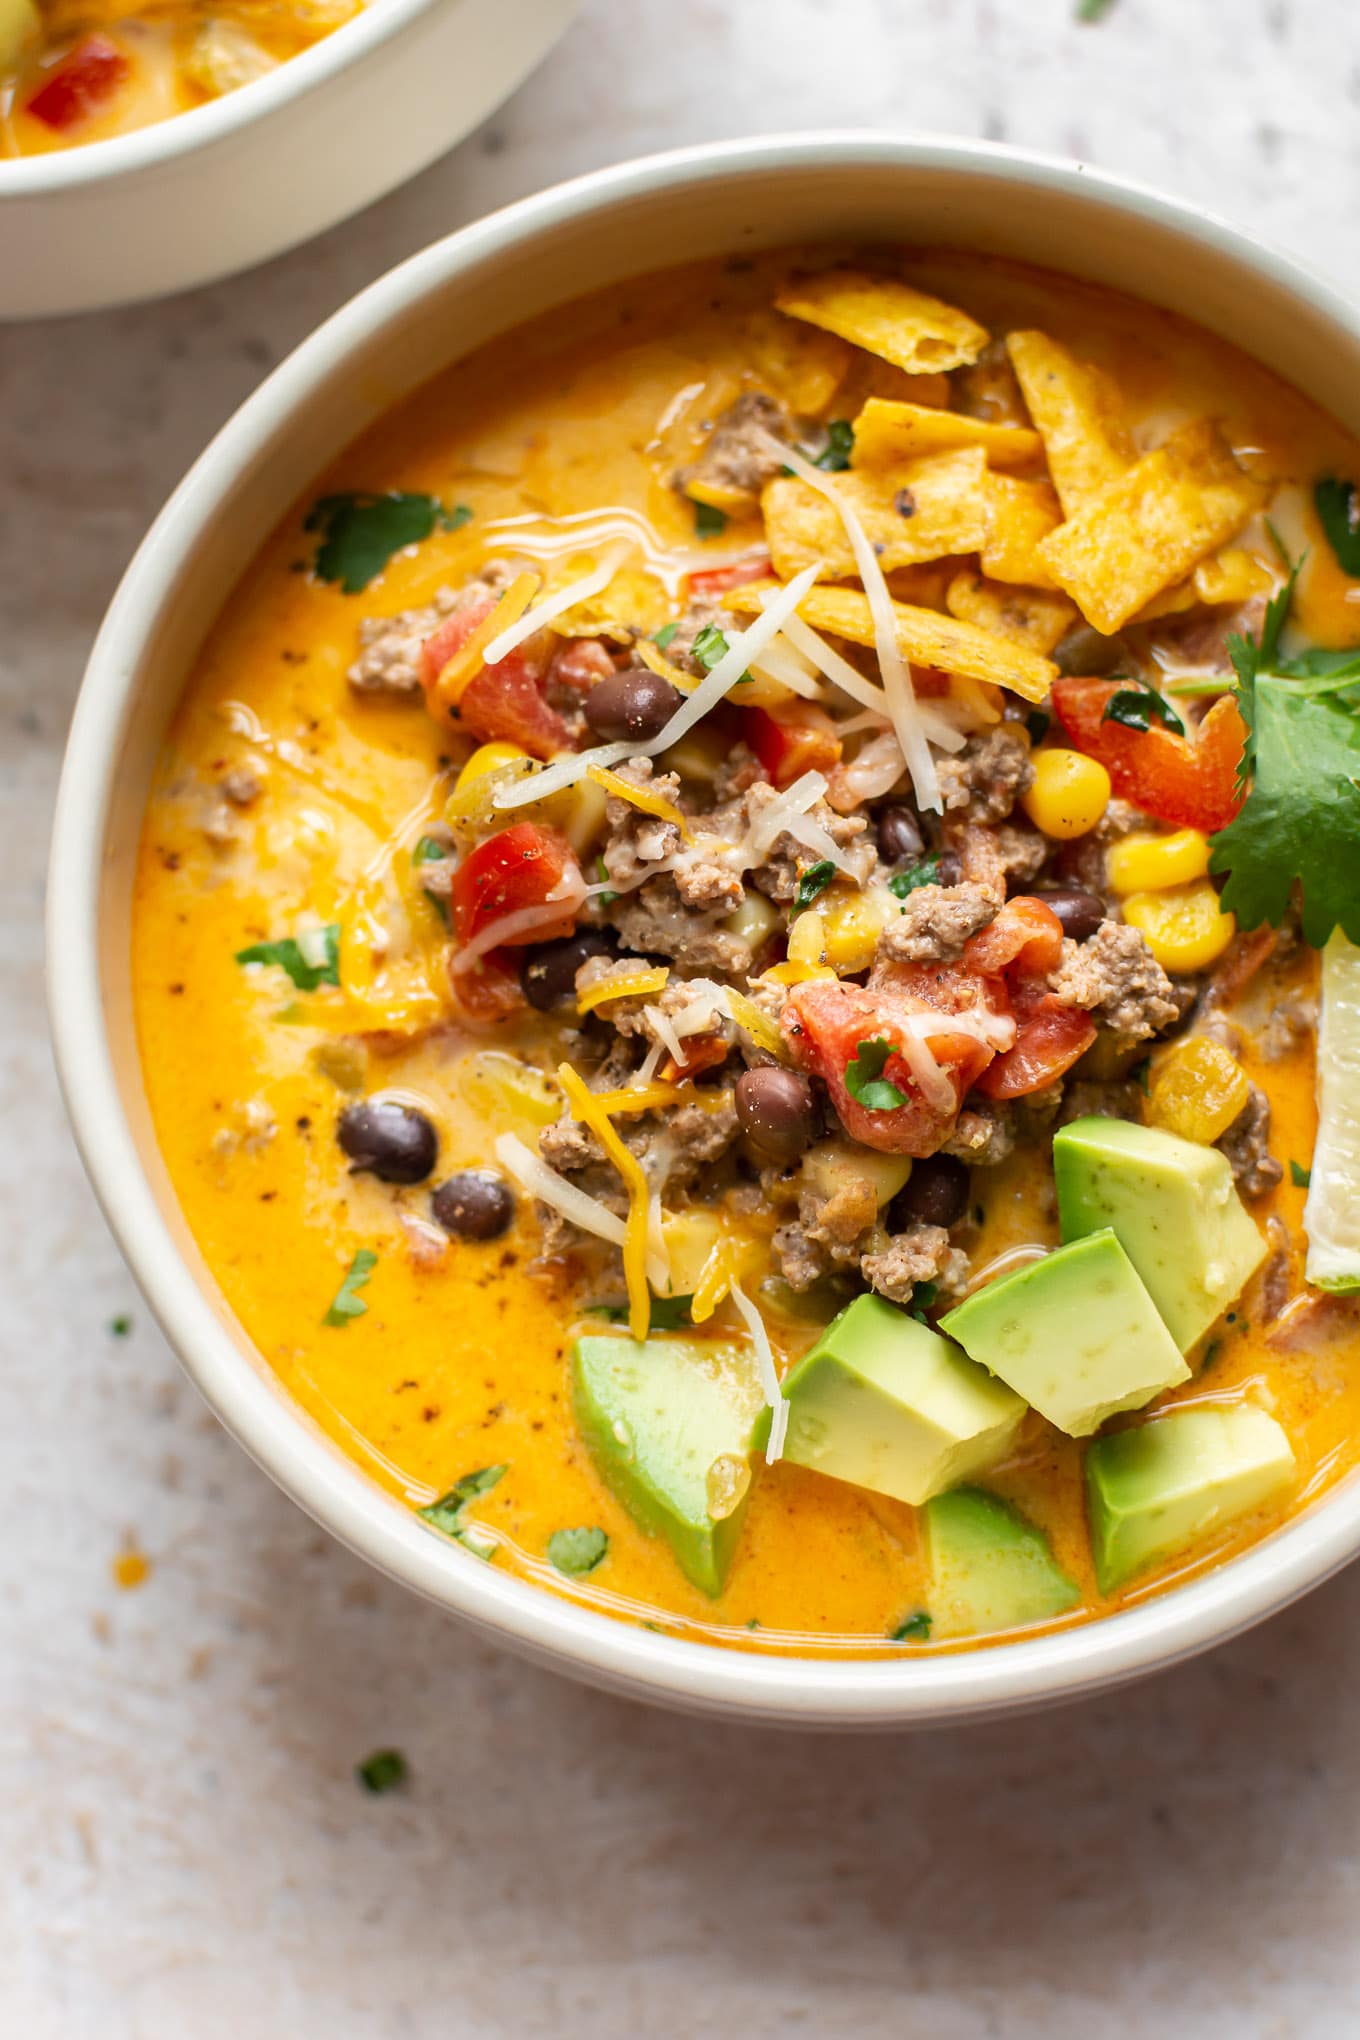 Steps To Prepare Mexican Soup Recipes With Ground Beef